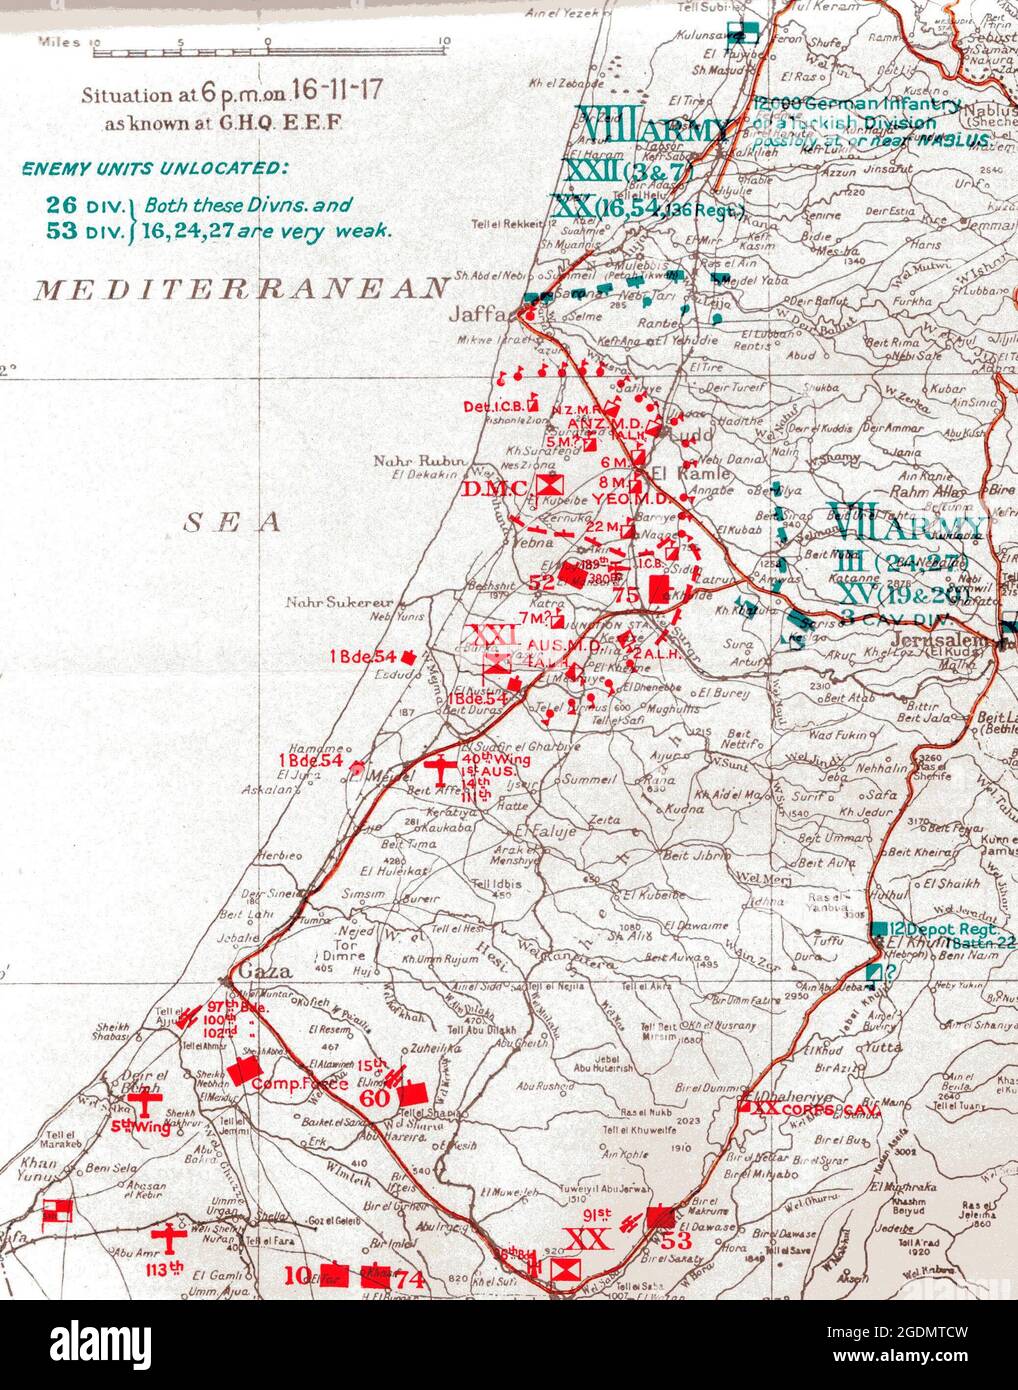 Battle for Jerusalem 1917. Map showing the situation at 18:00 on 16 November 1917 as known to GHQ EEF. Stock Photo